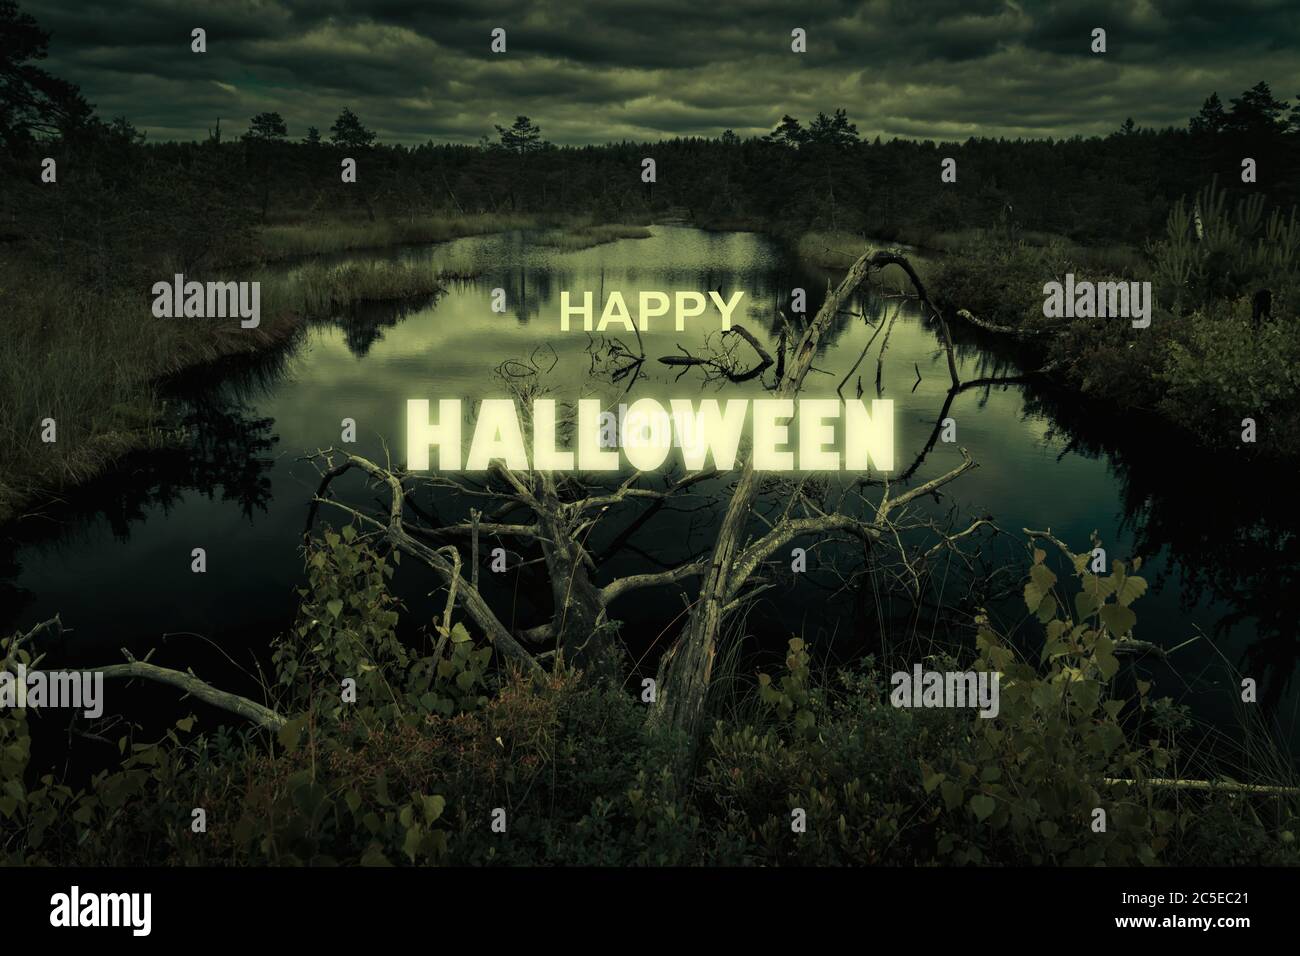 Haunted forest swamp on Halloween. Poster with spooky marsh or bog at night. Creepy view of dark mystery place in twilight. Scary gloomy landscape wit Stock Photo